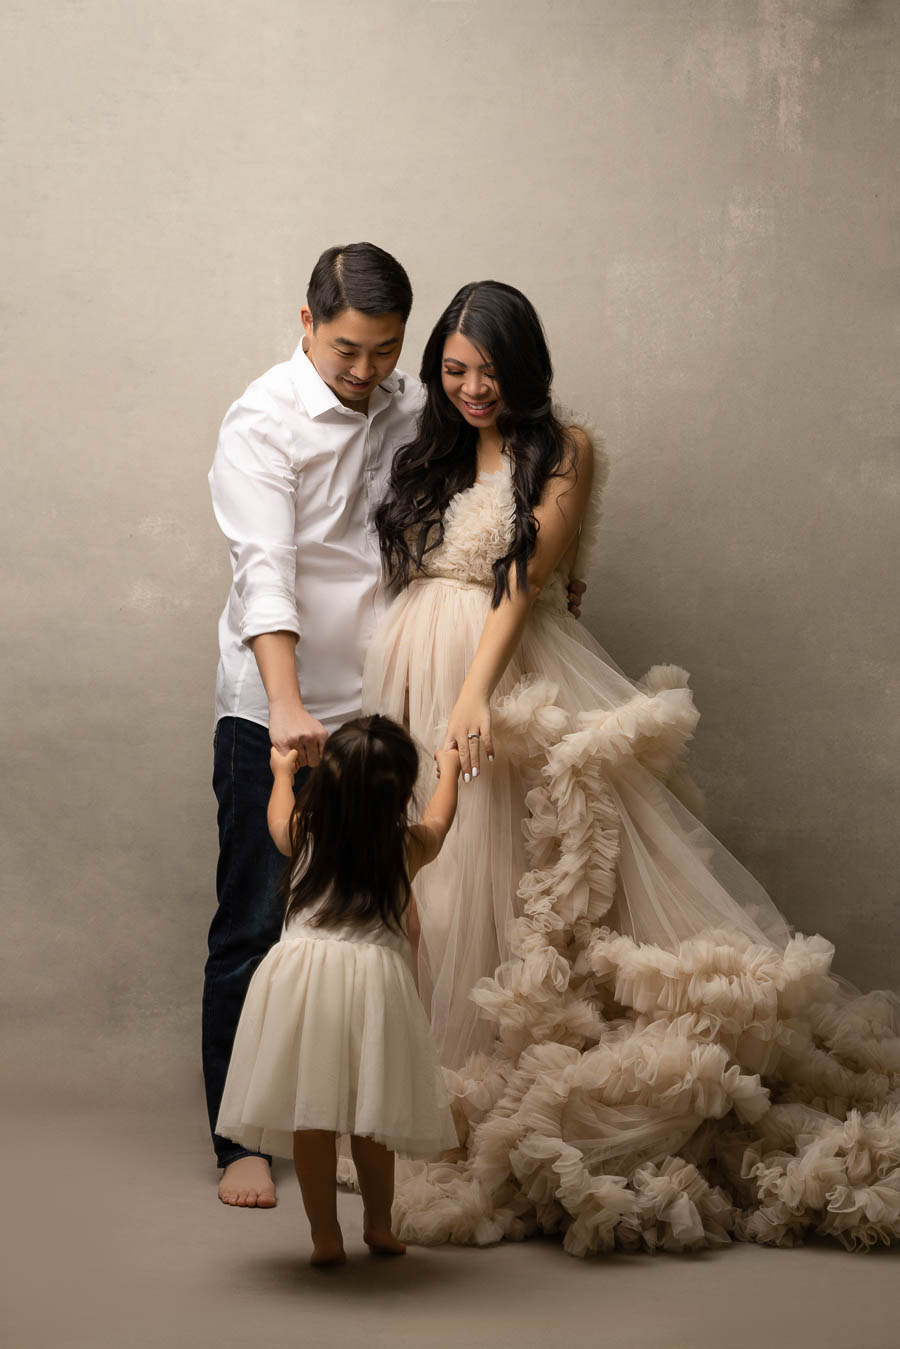 studio mommy and me maternity photo shoot, family maternity photo with ruffle tulle dress, mom, dad, and toddler girl